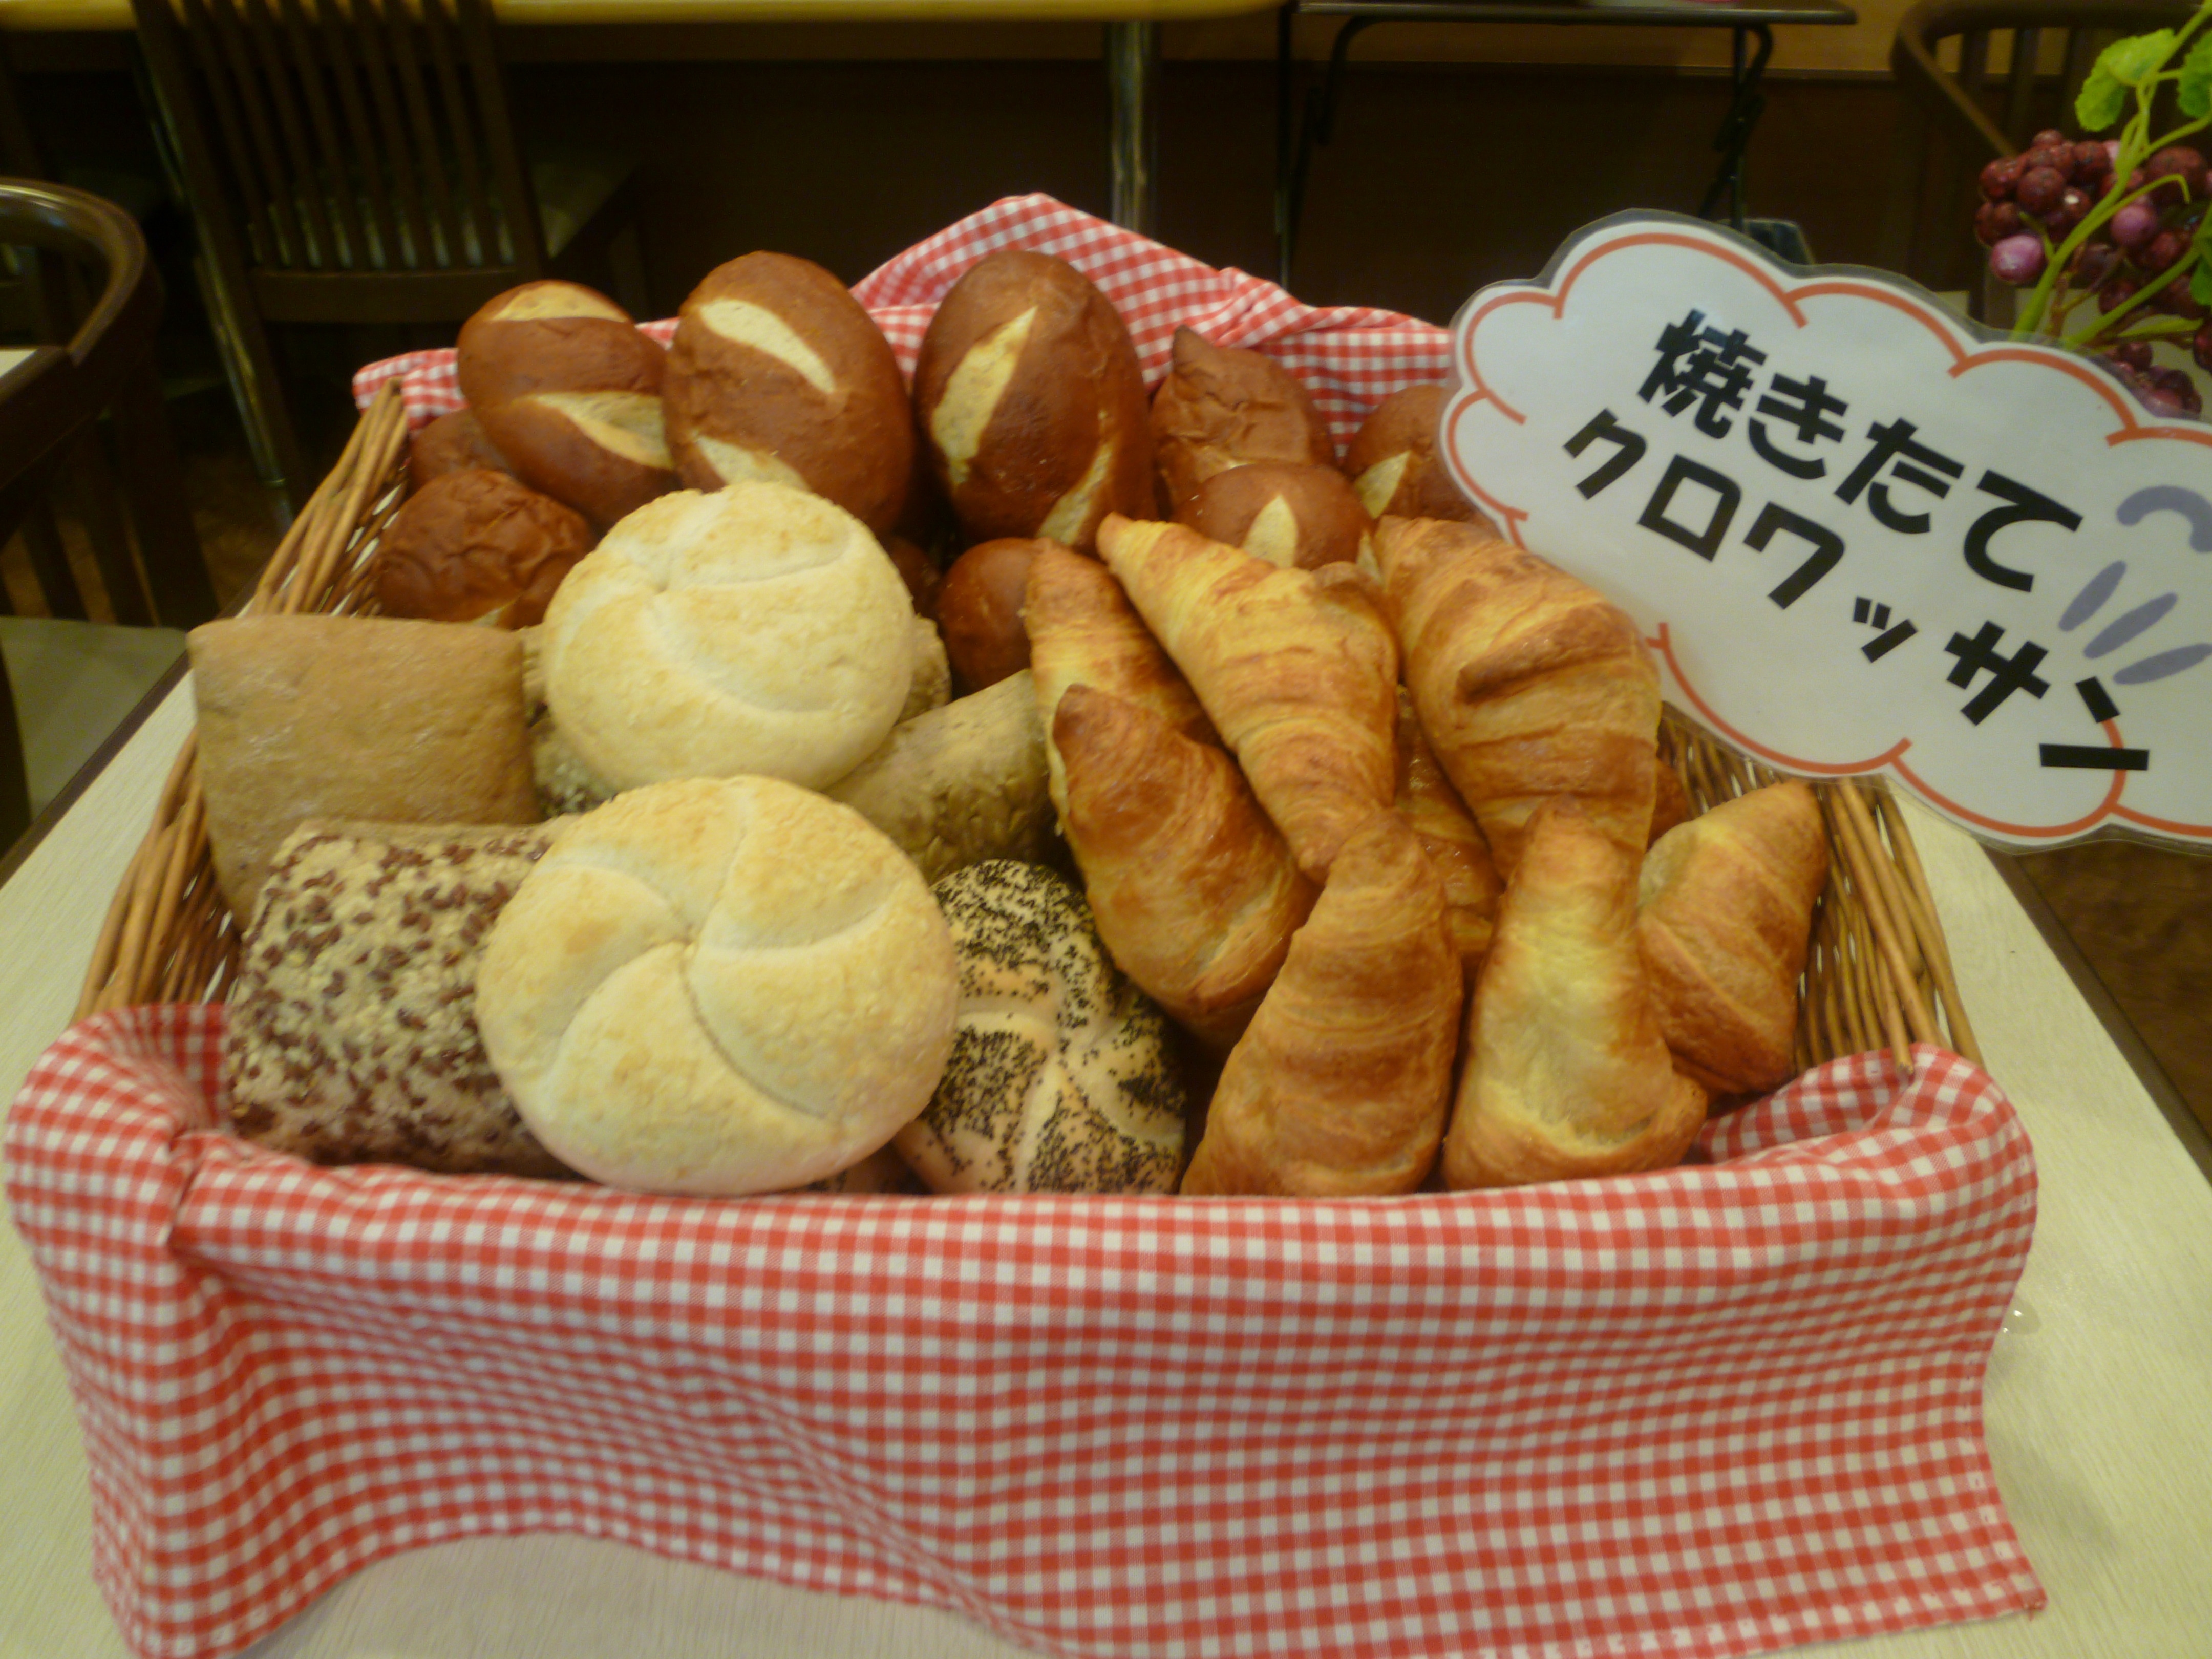 ◆ Route-in European bread is additive-free! You can enjoy it on a daily basis ♪